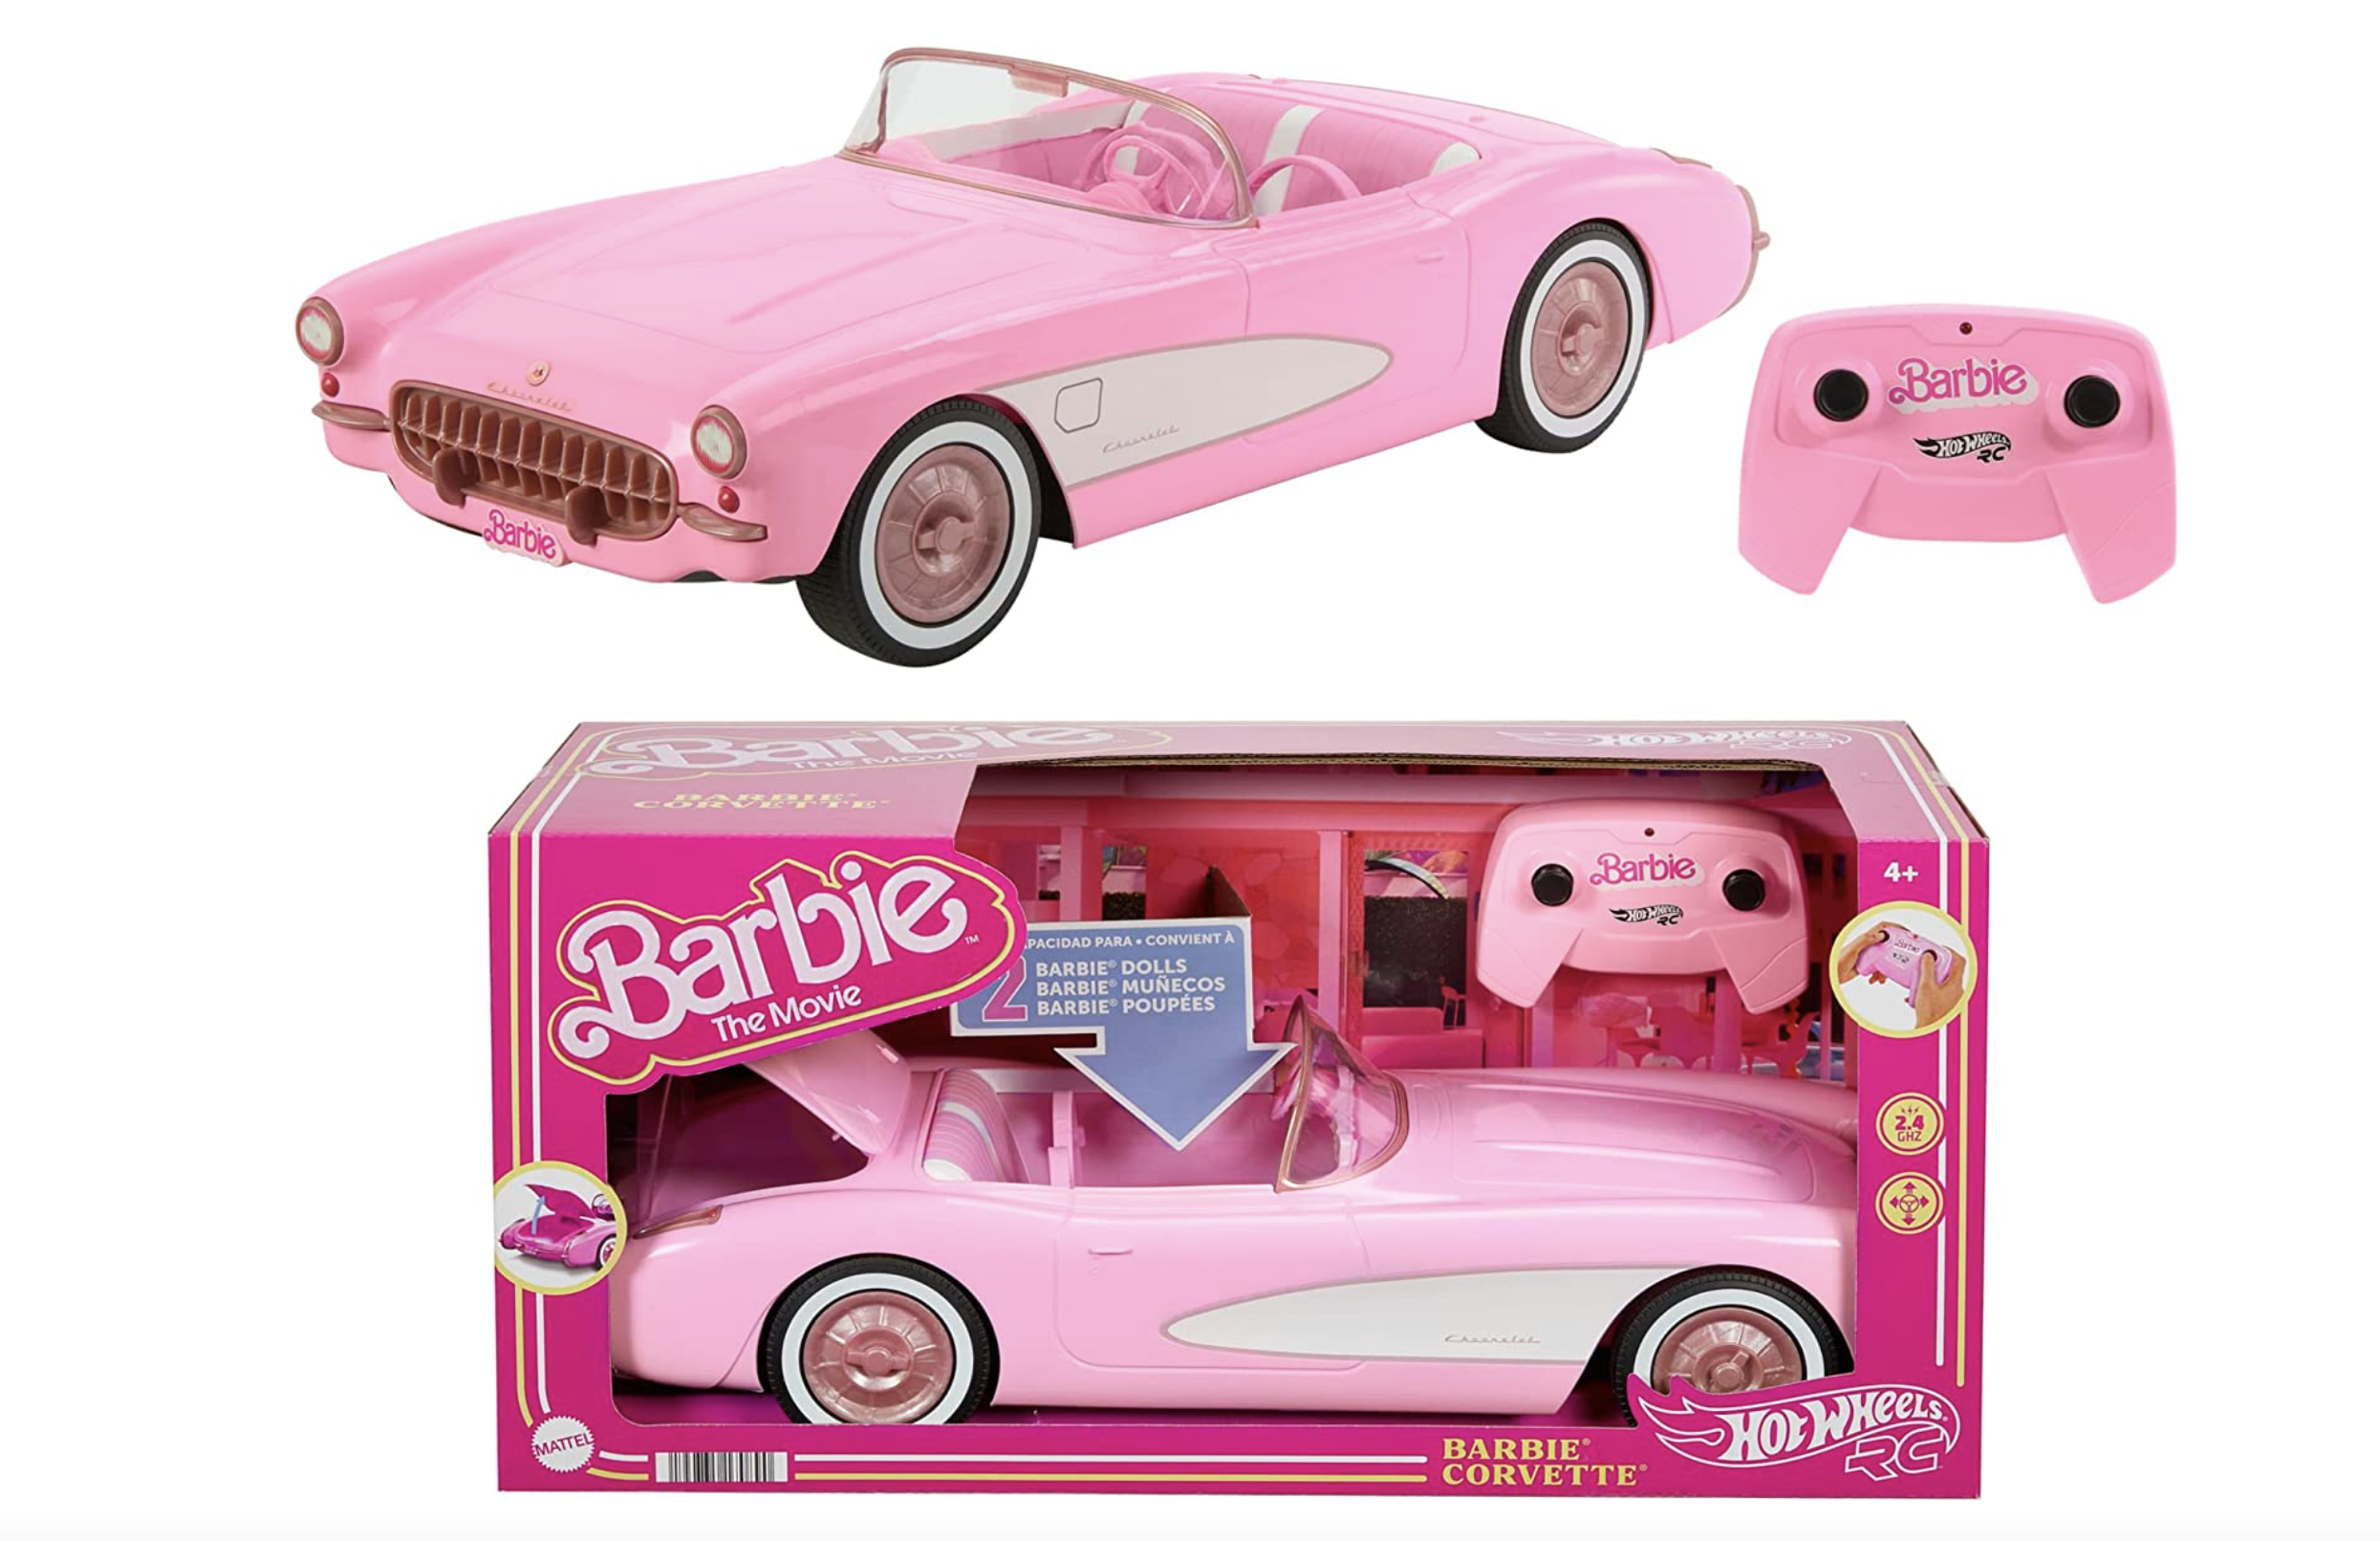 Multiple angles of the Barbie Corvette toy including the packaging